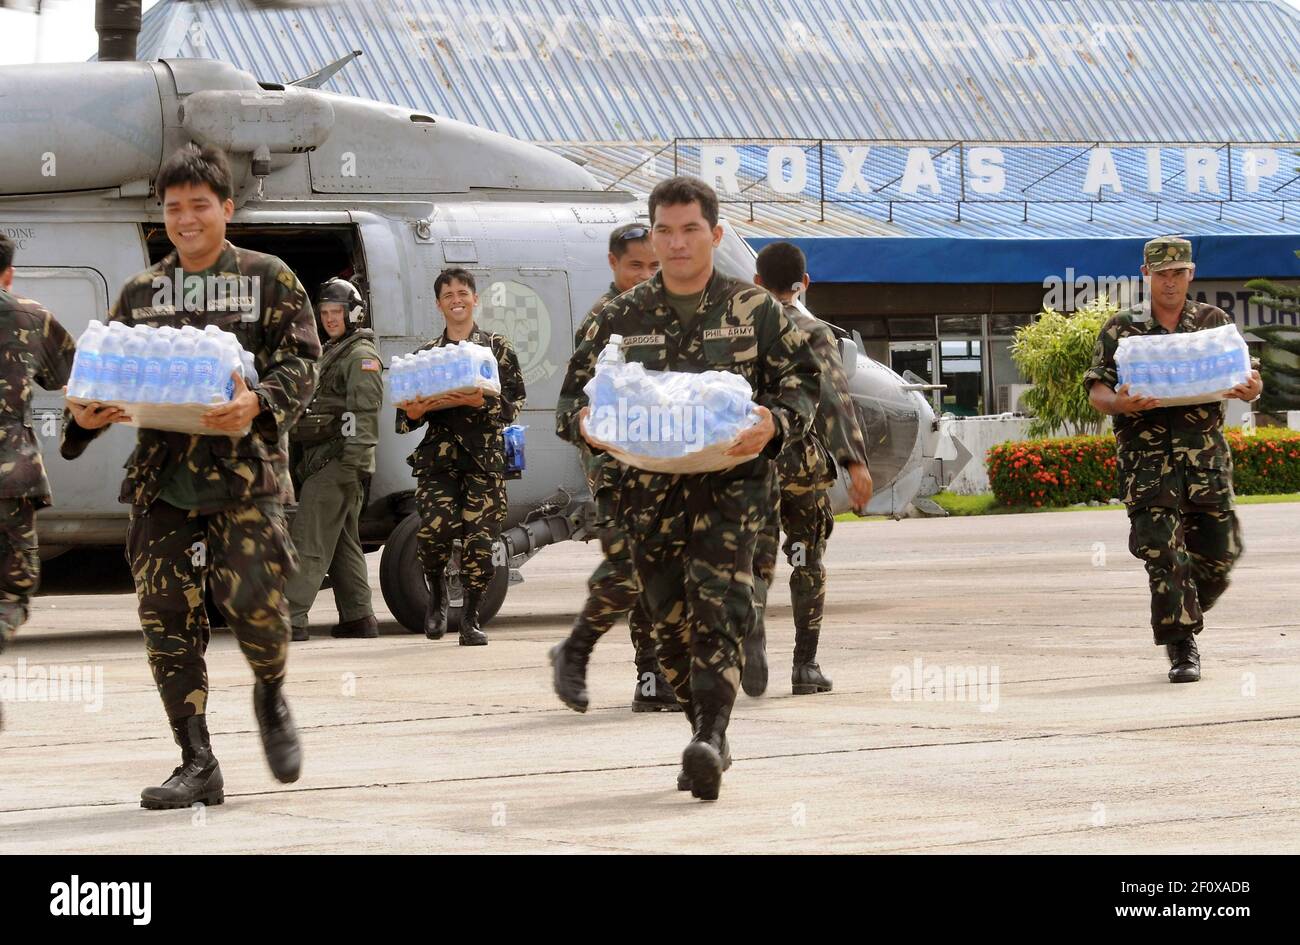 26 June 2008 - Philippines - Servicemen of the Philippine Army transport bottled water from an SH-60 helicopter assigned to Helicopter Anti-Submarine Squadron (HS) 4 at Roxas airport. The U.S. Navy and the Philippine Army and Air Force have been working side by side during disaster relief efforts in the wake of Typhoon Fengshen. At the request of the government of the Republic of the Philippines, the Nimitz-class aircraft carrier USS Ronald Reagan (CVN 76) is off the coast of Panay Island providing humanitarian assistance and disaster response. Ronald Reagan and other U.S. Navy ships are opera Stock Photo